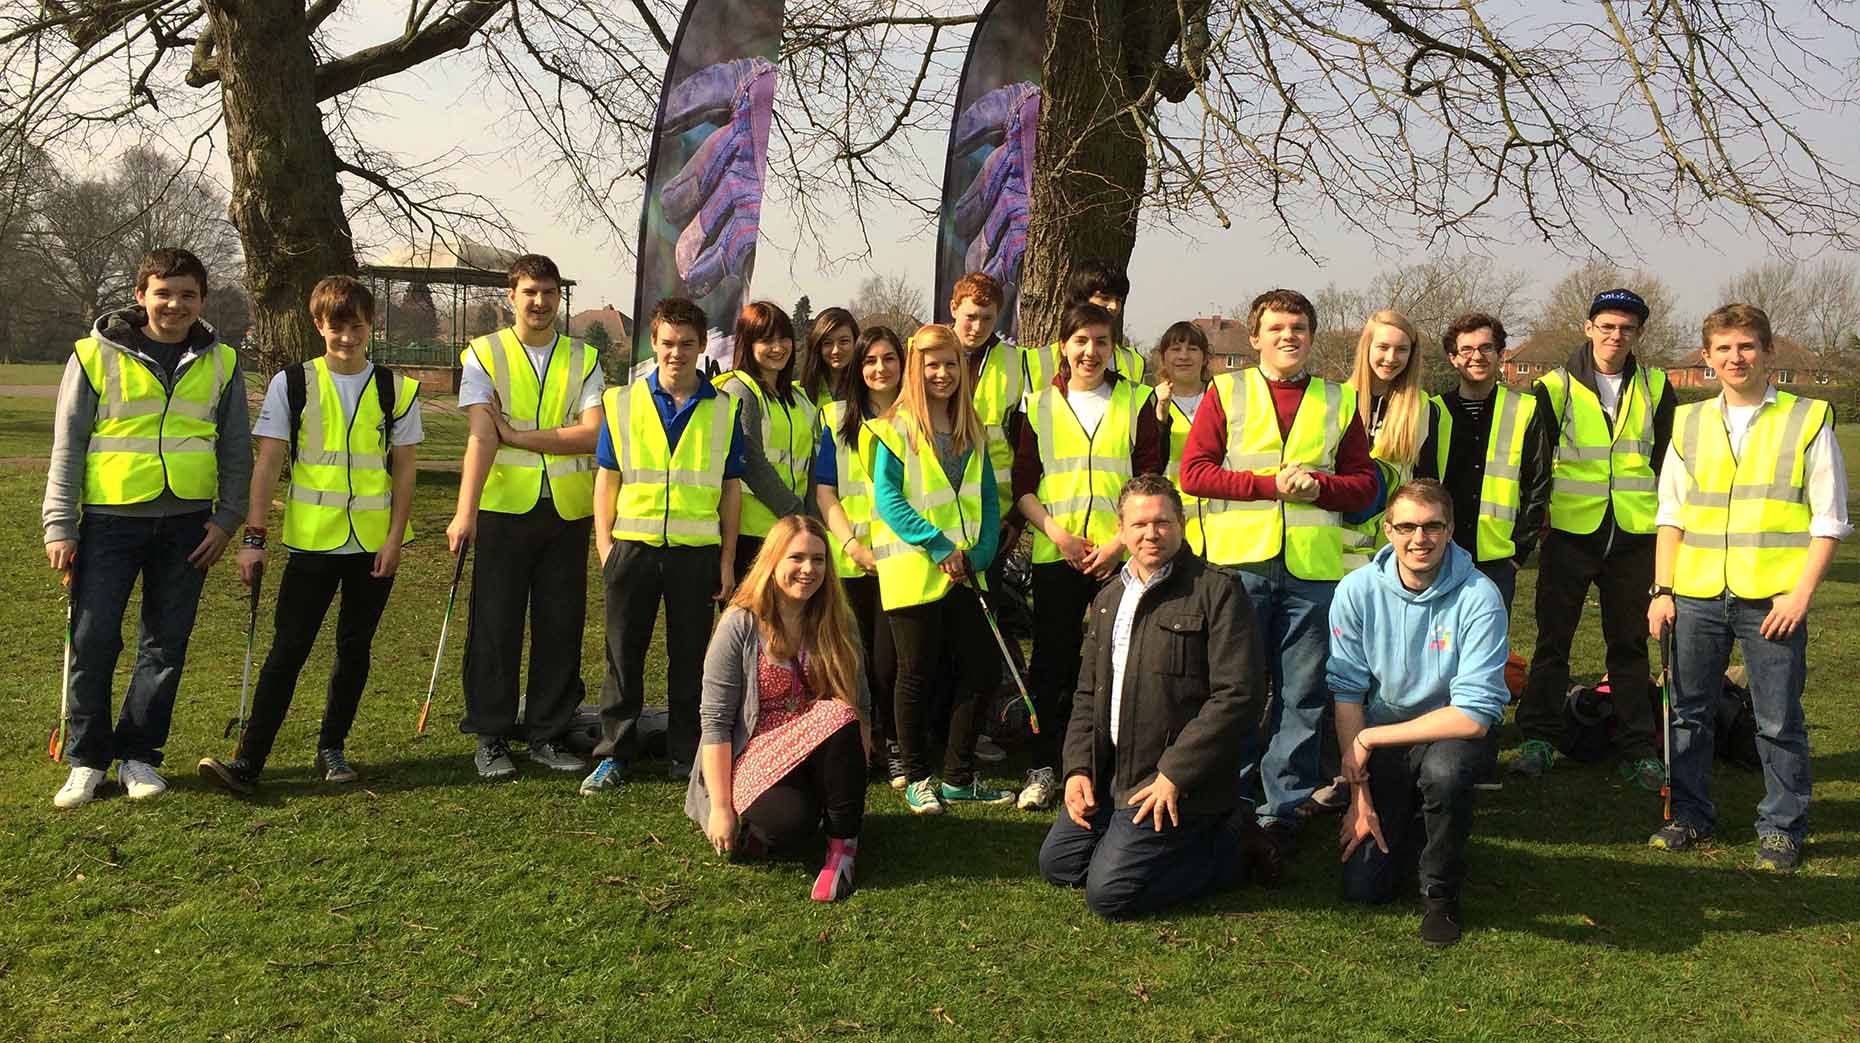 NCS graduates were joined by Lincoln MP Karl McCartney for the Boultham Park spring clean.